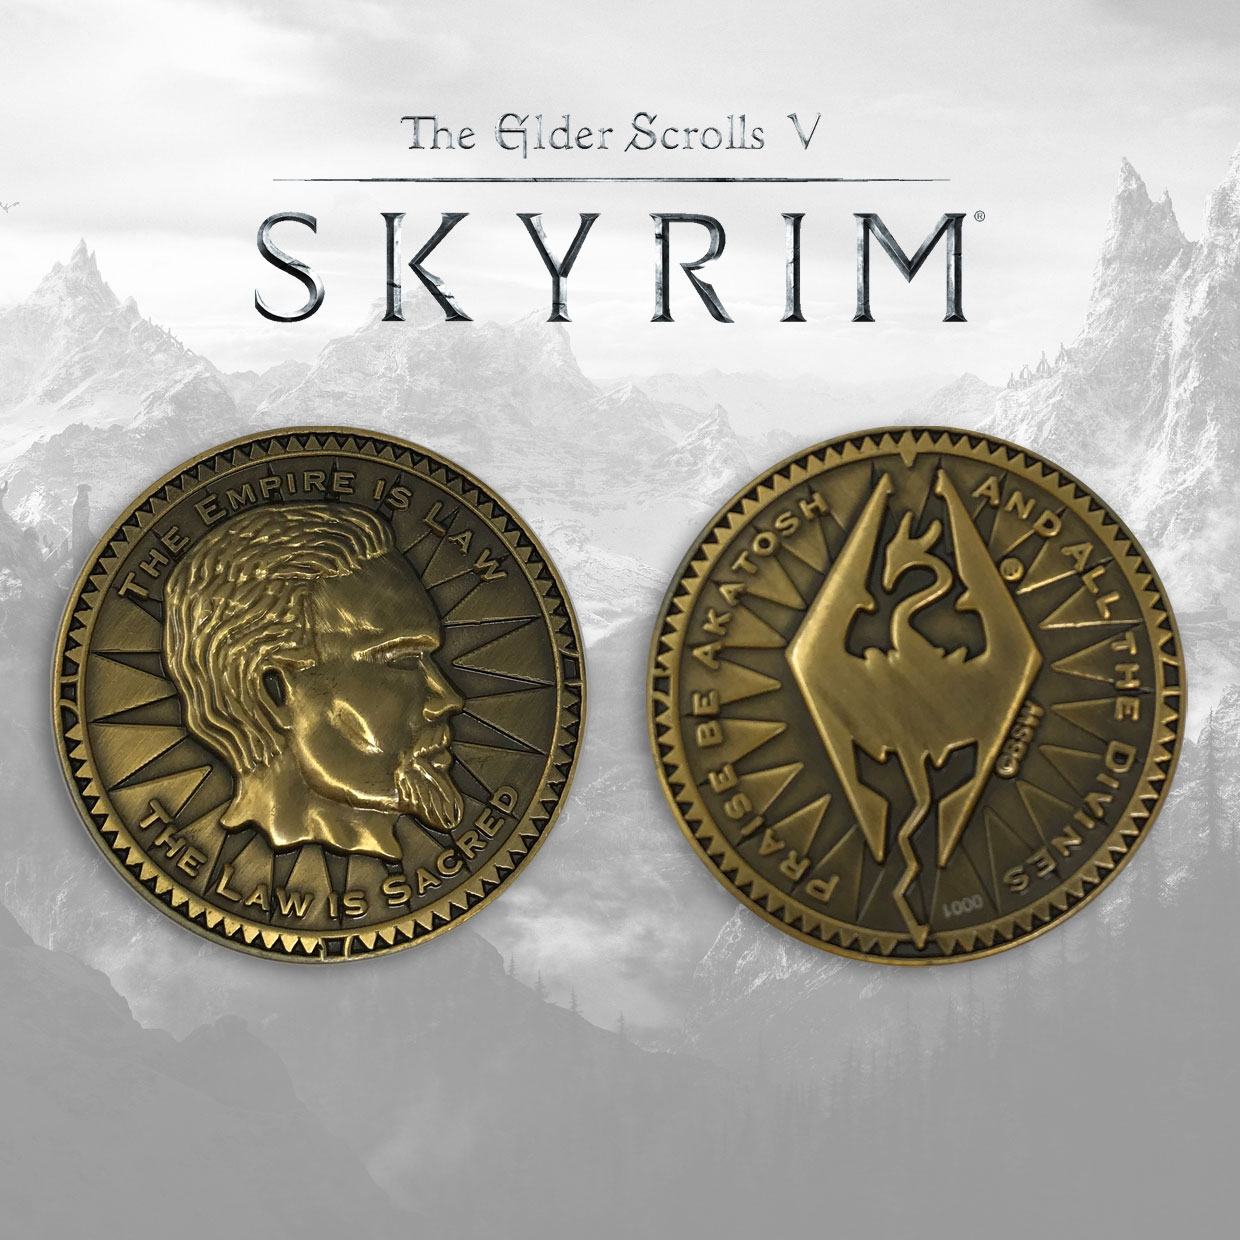 The Elder Scrolls V: Skyrim pice de collection The Empire Is Law